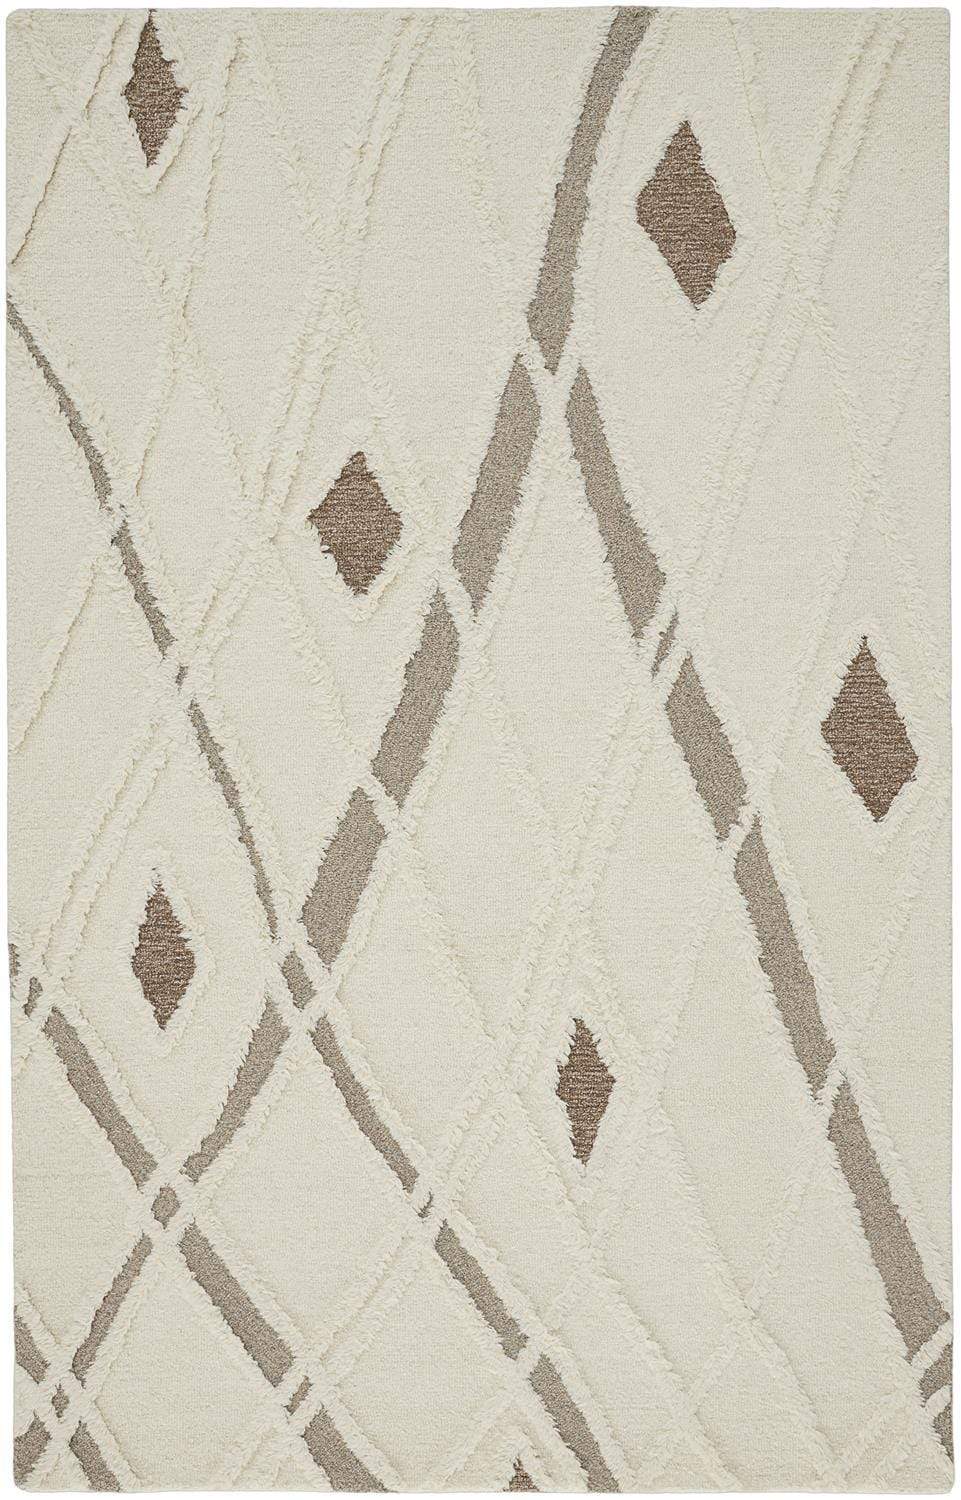 Feizy Feizy Anica Moroccan Style Wool Tufted Rug - Ivory & Chambray Brown - Available in 6 Sizes 4' x 6' ANC8008FIVYBRNC00